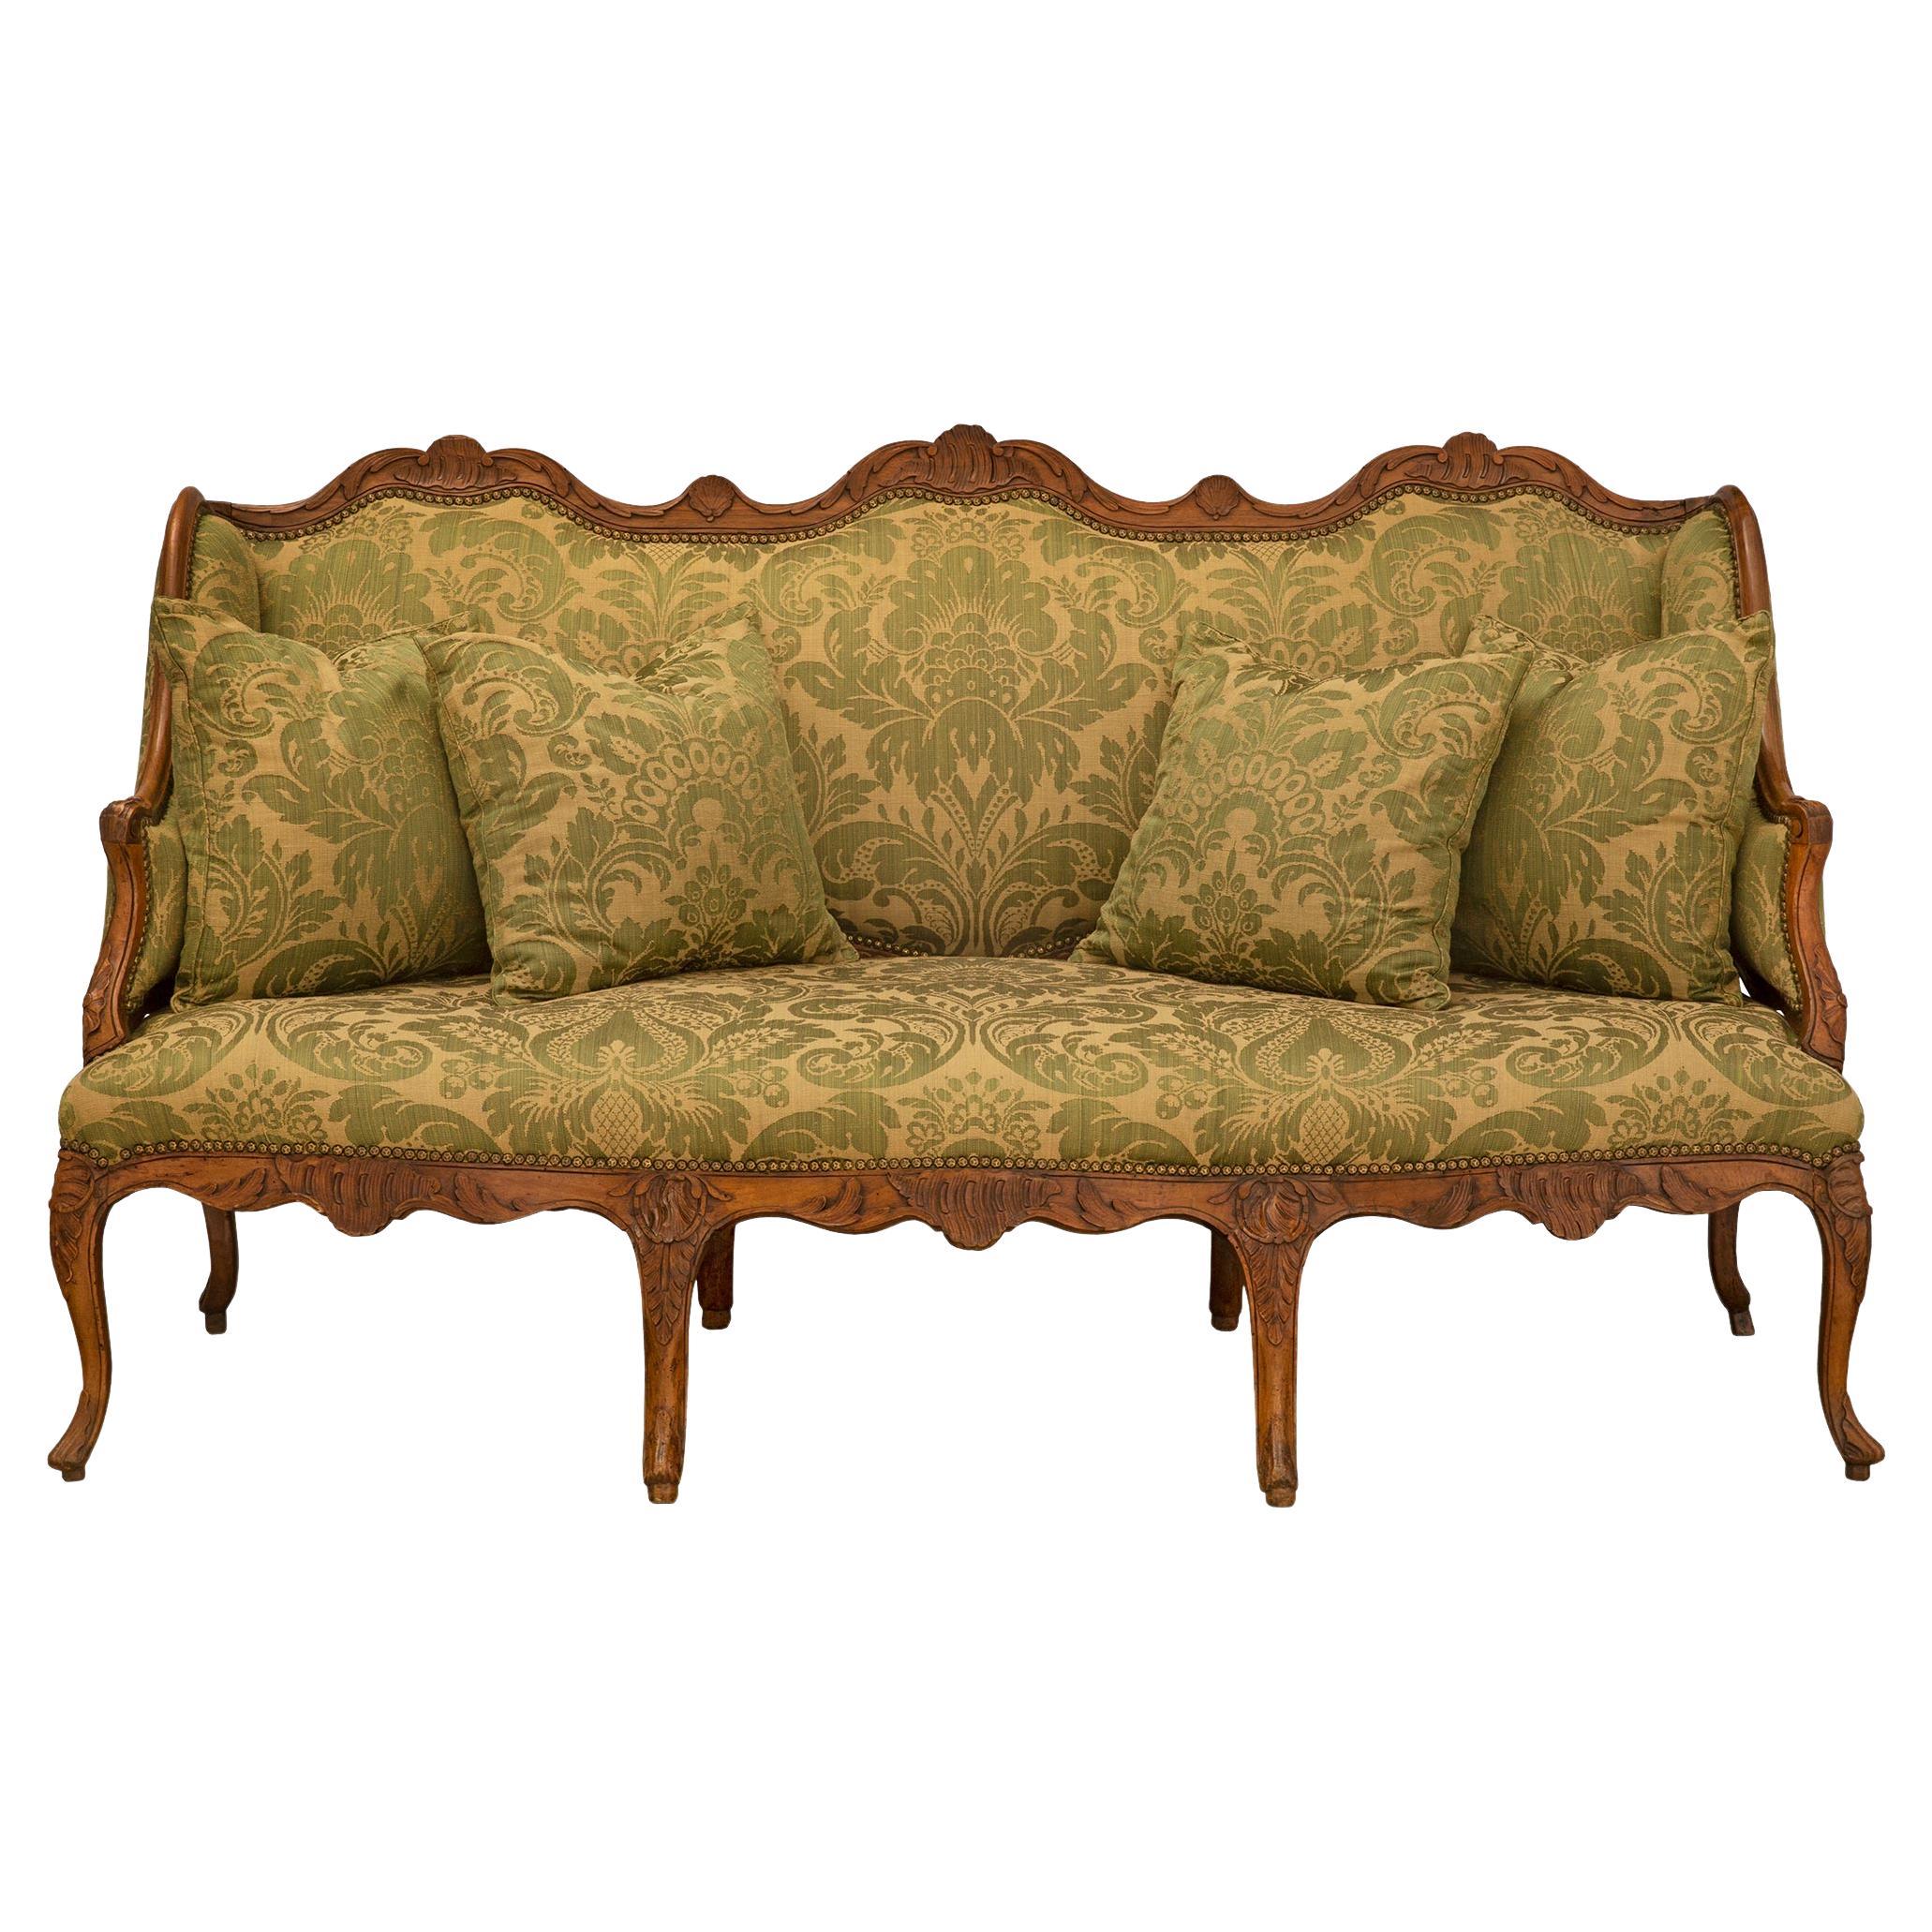 A large and richly carved French 18th century Louis XV period Walnut settee